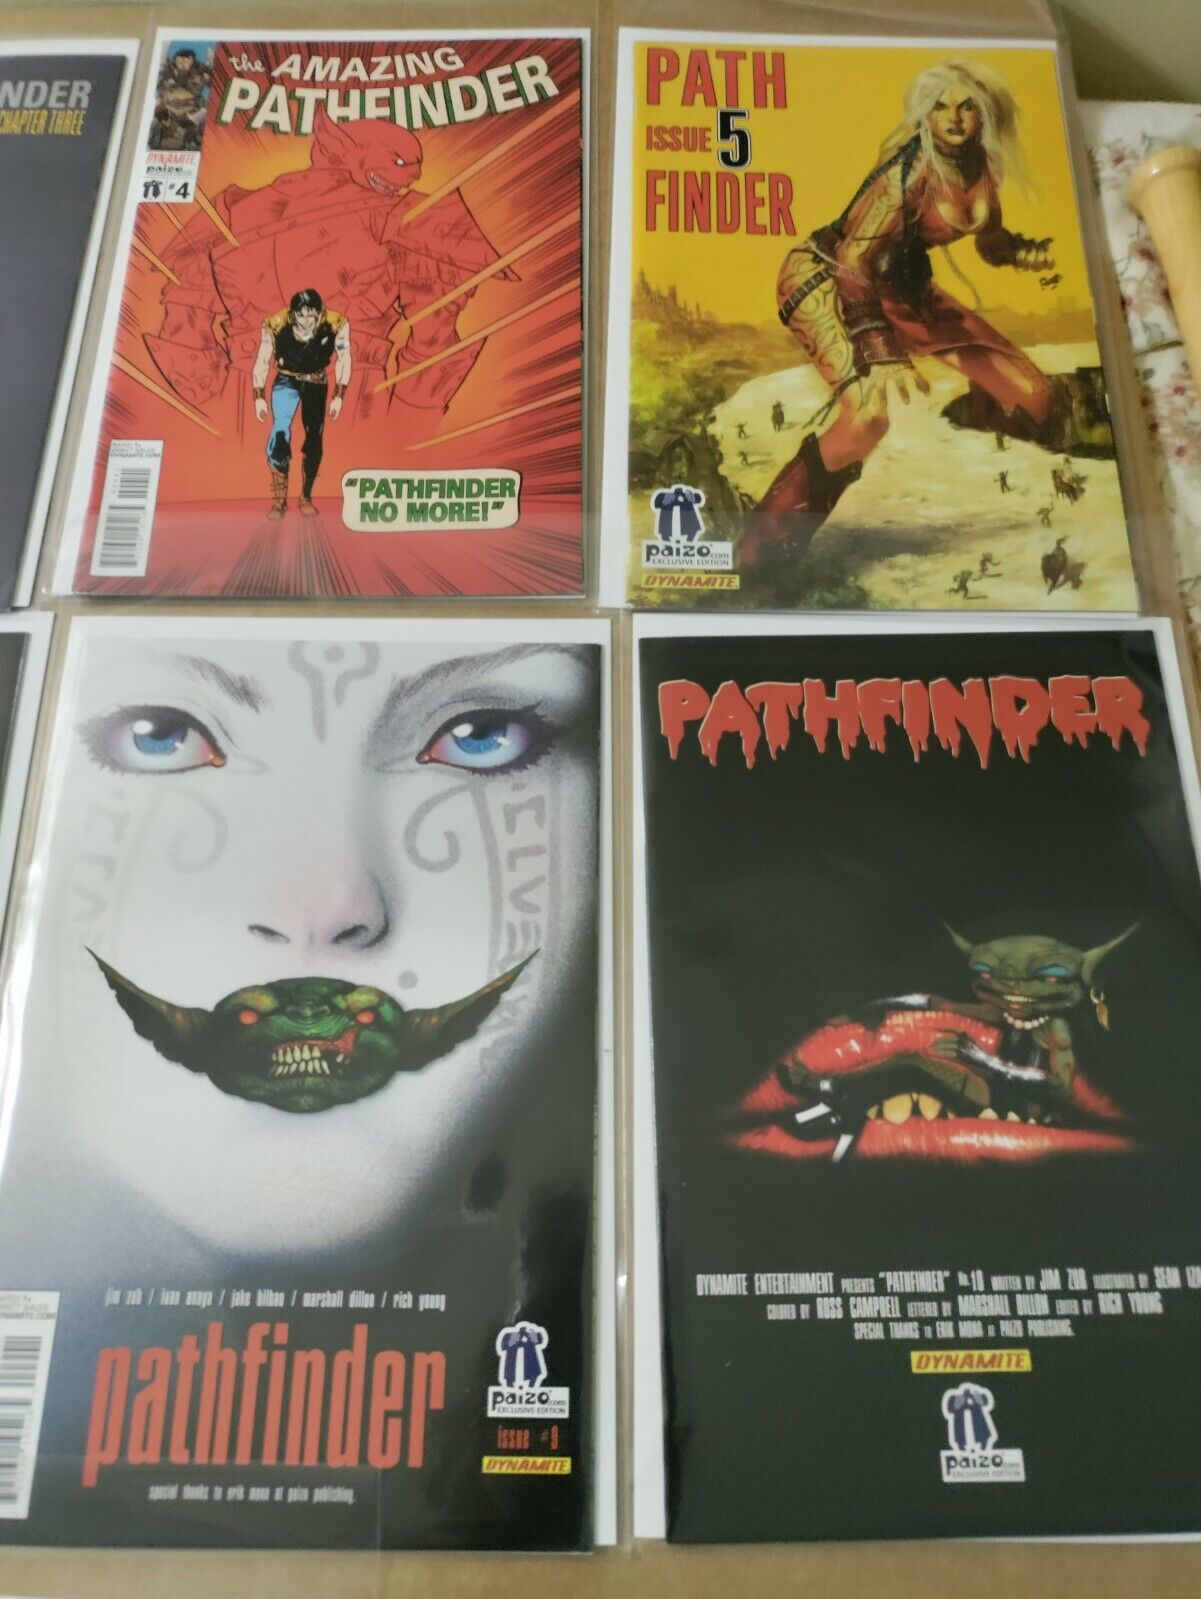 Pathfinder Dynamite Comics Issues 1 Through 12. 11 Piezo.com Exclusive Covers